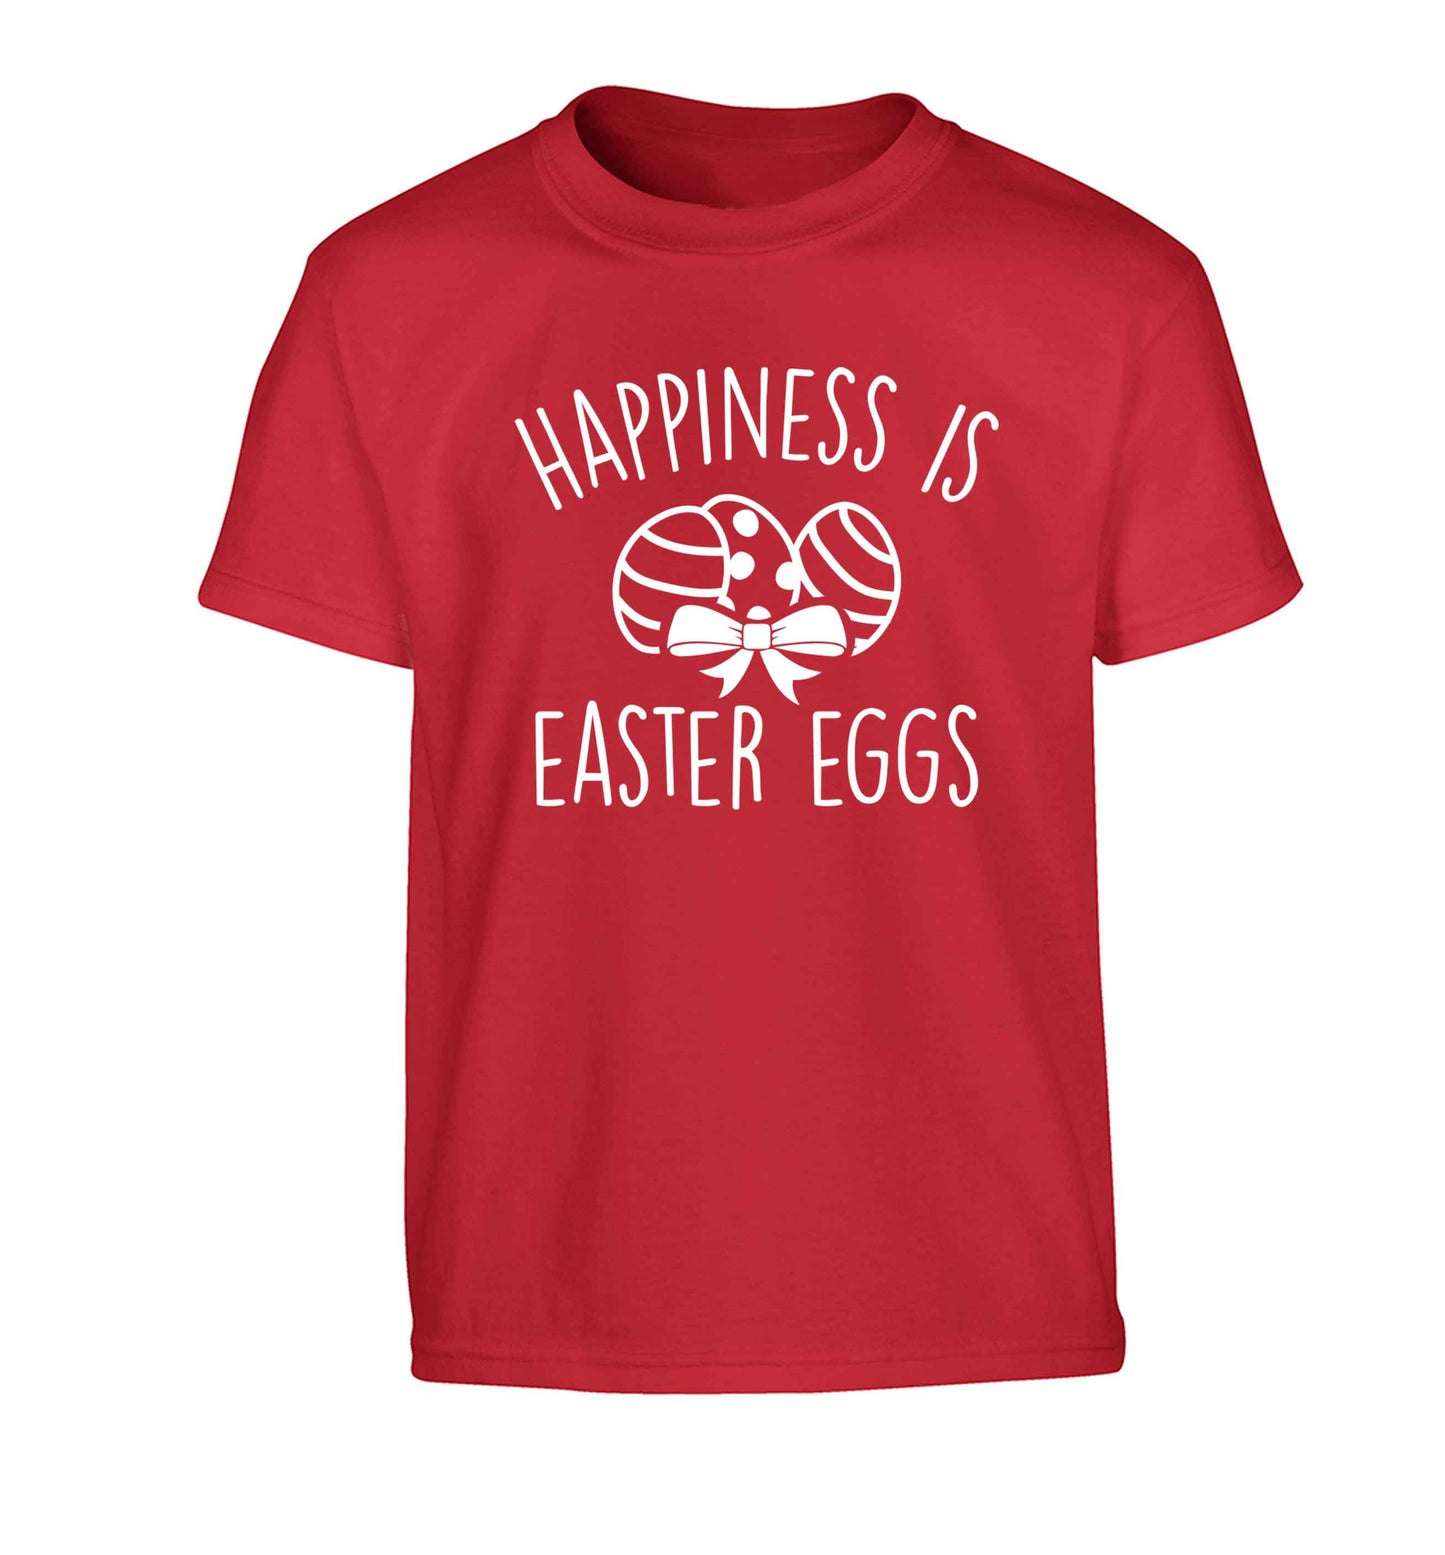 Happiness is Easter eggs Children's red Tshirt 12-13 Years